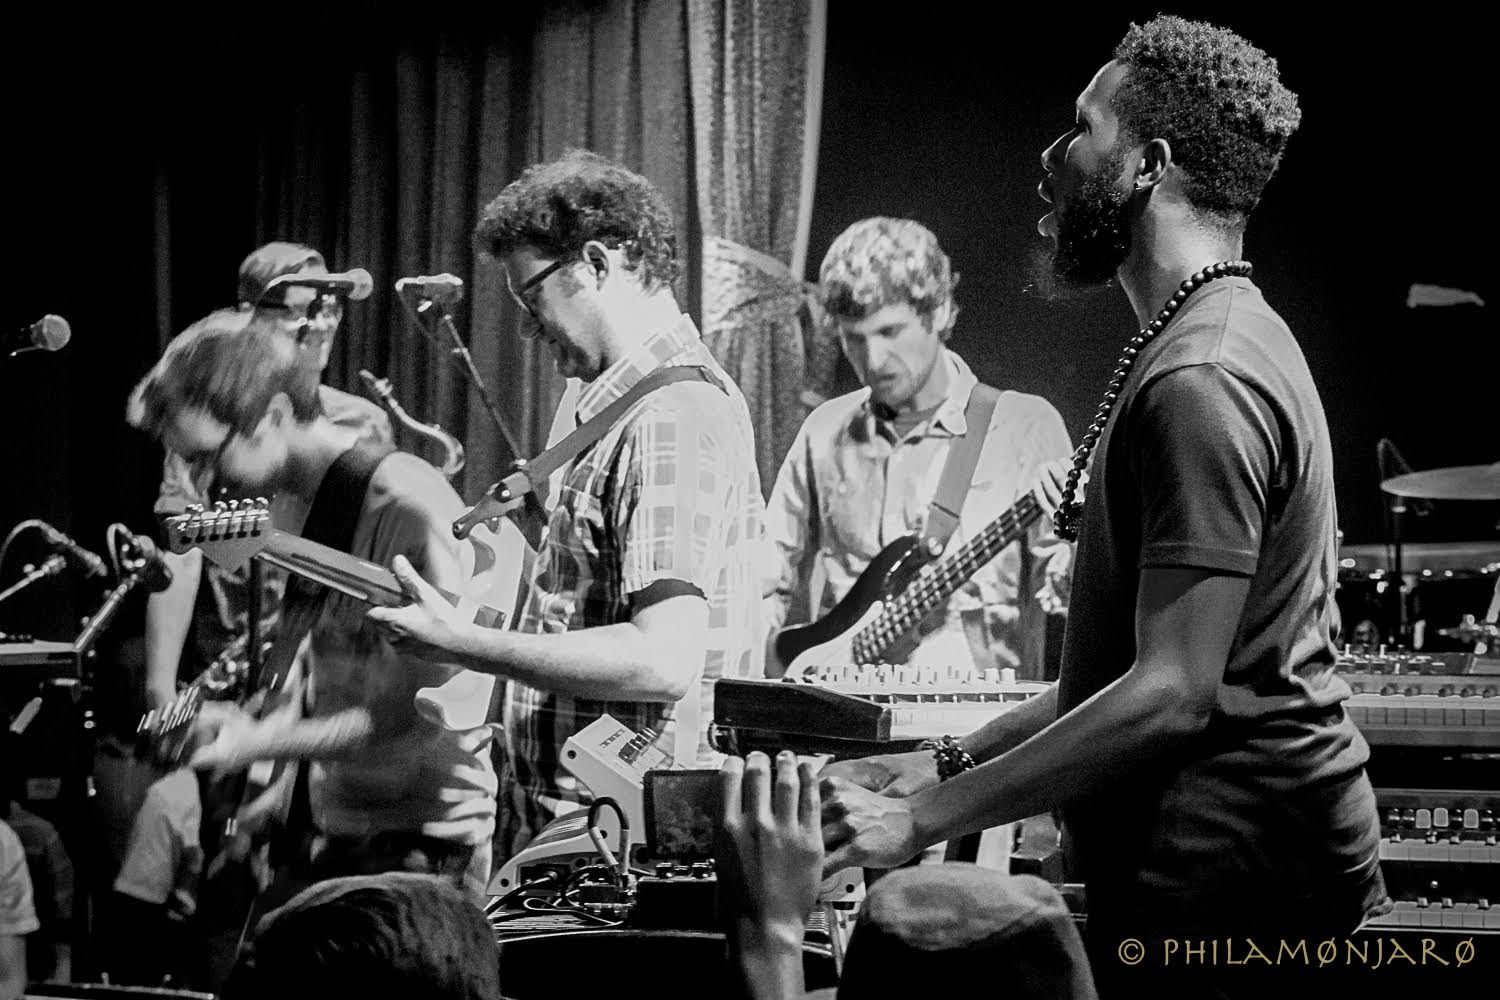 Photos / Video | Bill Frisell & Snarky Puppy @ City Winery